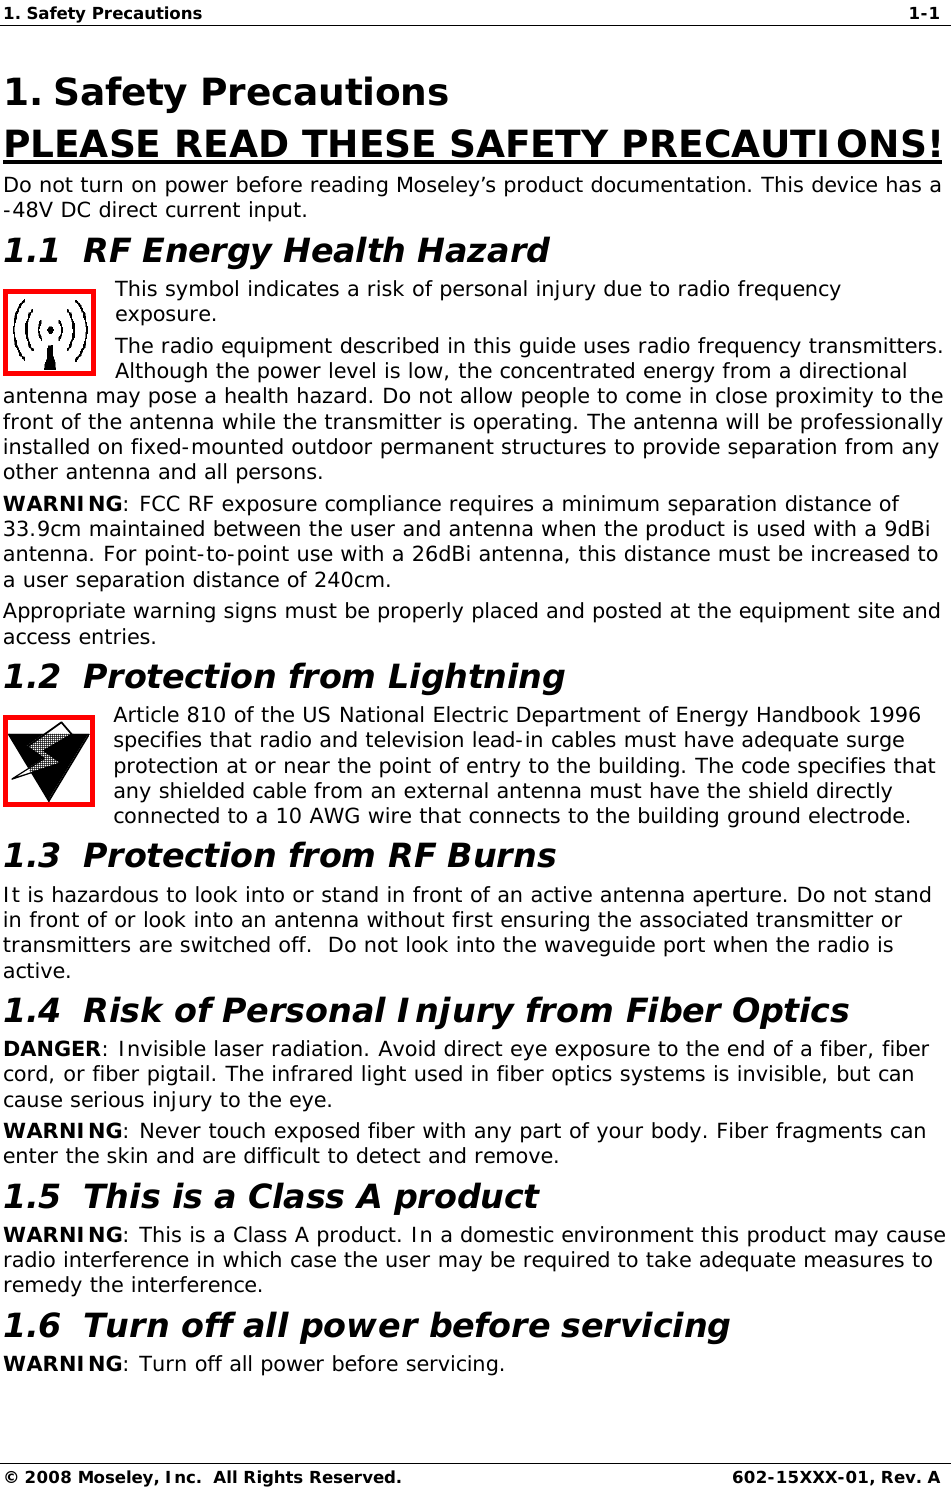 1. Safety Precautions  1-1 © 2008 Moseley, Inc.  All Rights Reserved.  602-15XXX-01, Rev. A 1. Safety Precautions PLEASE READ THESE SAFETY PRECAUTIONS! Do not turn on power before reading Moseley’s product documentation. This device has a -48V DC direct current input. 1.1  RF Energy Health Hazard This symbol indicates a risk of personal injury due to radio frequency exposure. The radio equipment described in this guide uses radio frequency transmitters. Although the power level is low, the concentrated energy from a directional antenna may pose a health hazard. Do not allow people to come in close proximity to the front of the antenna while the transmitter is operating. The antenna will be professionally installed on fixed-mounted outdoor permanent structures to provide separation from any other antenna and all persons. WARNING: FCC RF exposure compliance requires a minimum separation distance of 33.9cm maintained between the user and antenna when the product is used with a 9dBi antenna. For point-to-point use with a 26dBi antenna, this distance must be increased to a user separation distance of 240cm. Appropriate warning signs must be properly placed and posted at the equipment site and access entries.  1.2  Protection from Lightning Article 810 of the US National Electric Department of Energy Handbook 1996 specifies that radio and television lead-in cables must have adequate surge protection at or near the point of entry to the building. The code specifies that any shielded cable from an external antenna must have the shield directly connected to a 10 AWG wire that connects to the building ground electrode. 1.3  Protection from RF Burns It is hazardous to look into or stand in front of an active antenna aperture. Do not stand in front of or look into an antenna without first ensuring the associated transmitter or transmitters are switched off.  Do not look into the waveguide port when the radio is active. 1.4  Risk of Personal Injury from Fiber Optics DANGER: Invisible laser radiation. Avoid direct eye exposure to the end of a fiber, fiber cord, or fiber pigtail. The infrared light used in fiber optics systems is invisible, but can cause serious injury to the eye. WARNING: Never touch exposed fiber with any part of your body. Fiber fragments can enter the skin and are difficult to detect and remove. 1.5  This is a Class A product WARNING: This is a Class A product. In a domestic environment this product may cause radio interference in which case the user may be required to take adequate measures to remedy the interference.  1.6  Turn off all power before servicing WARNING: Turn off all power before servicing. 